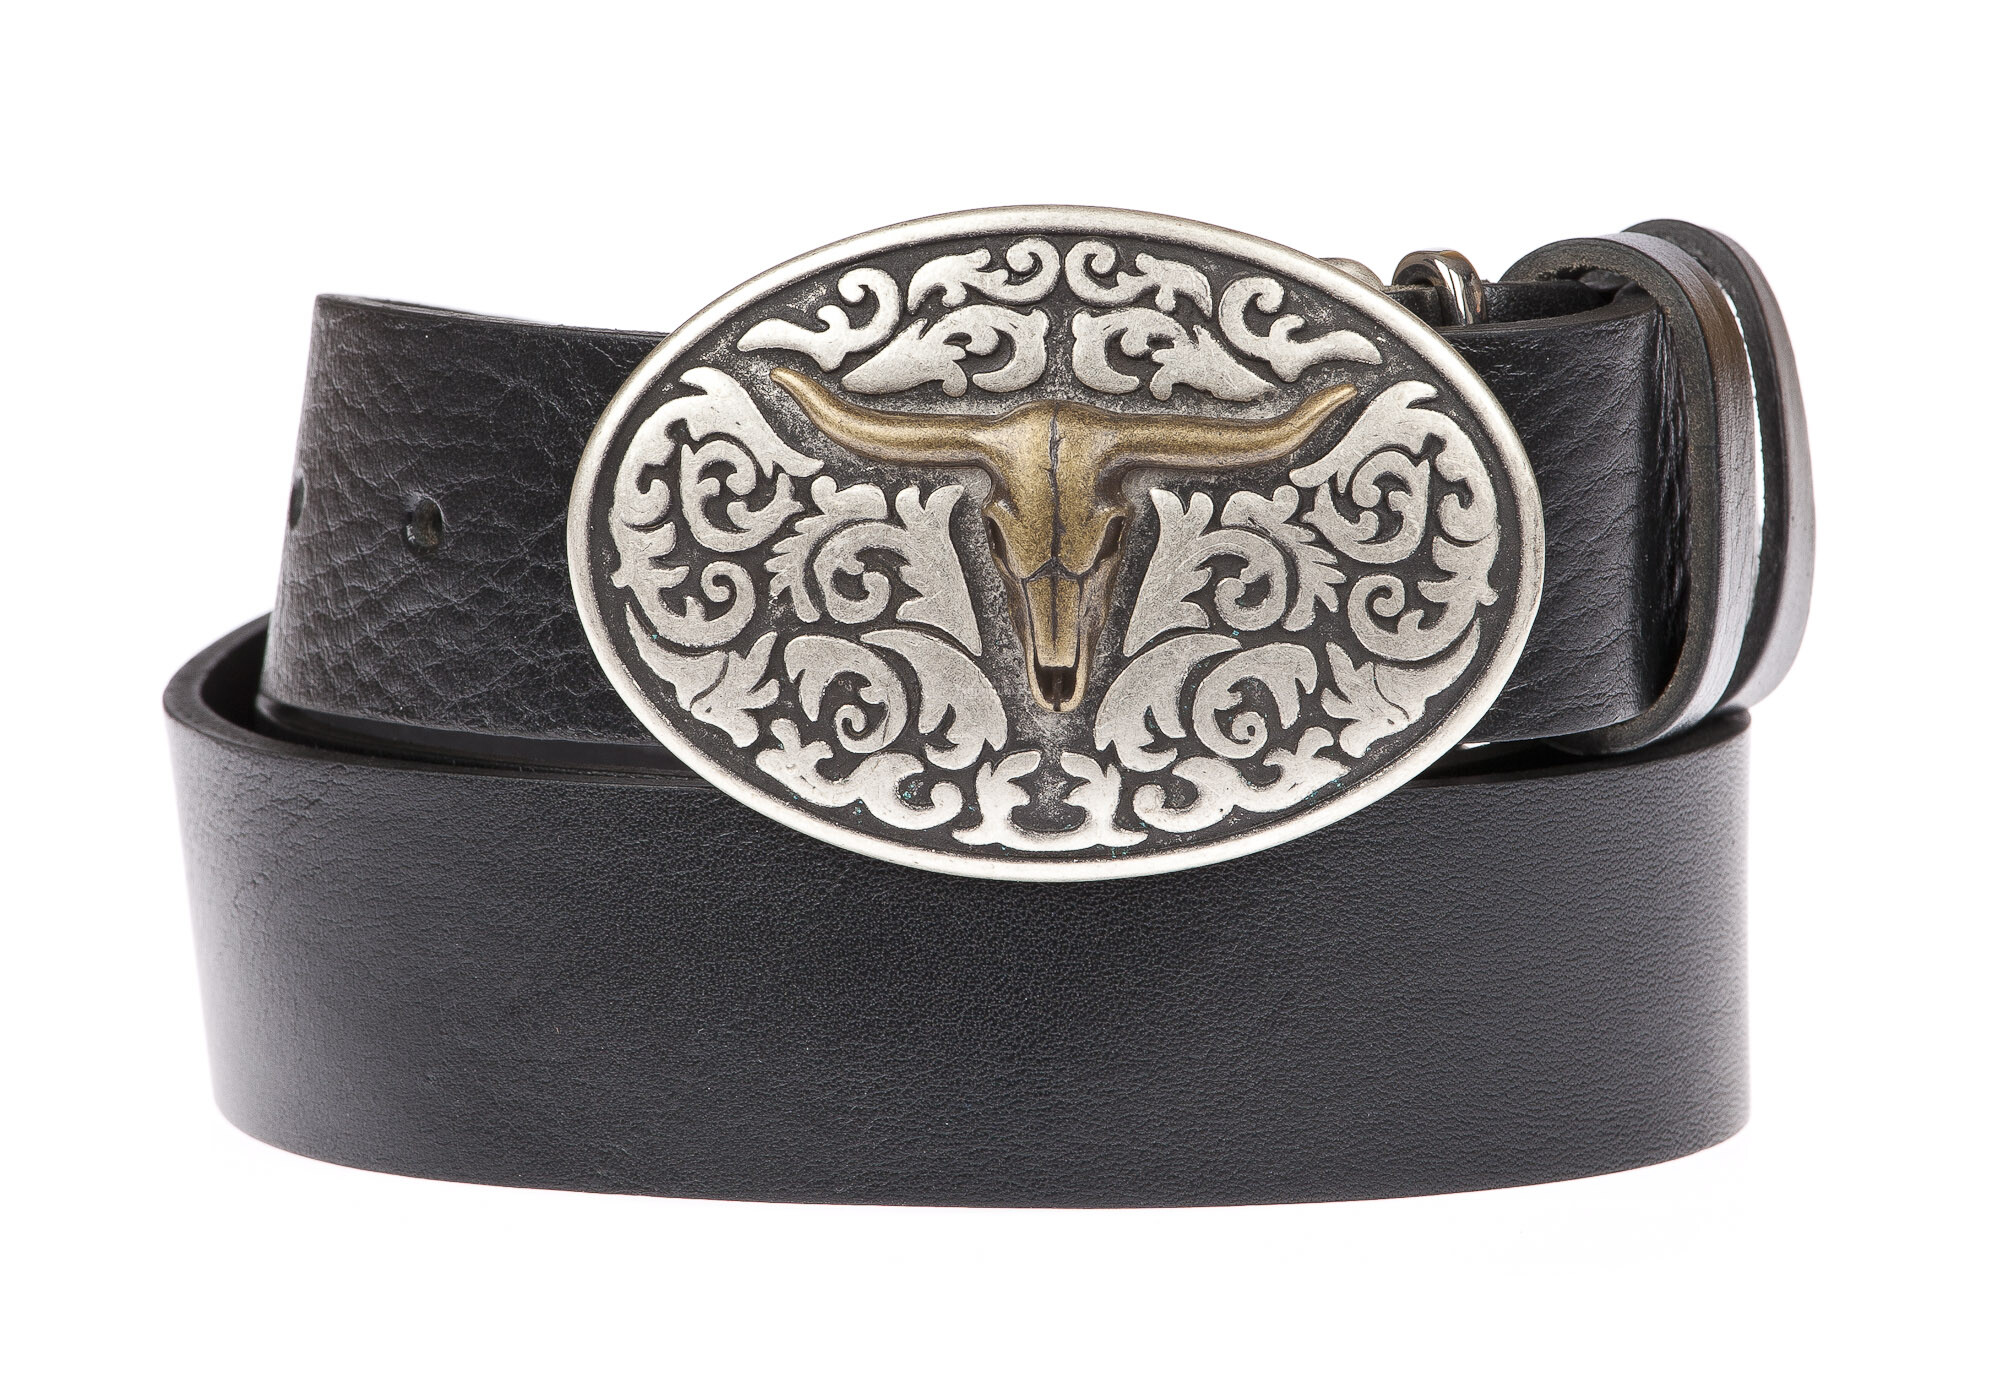 TEXAS: men's leather belt, craft buckle, color: BLACK, Made in Italy, LEATHER BELTS SPECIAL BUCKLES